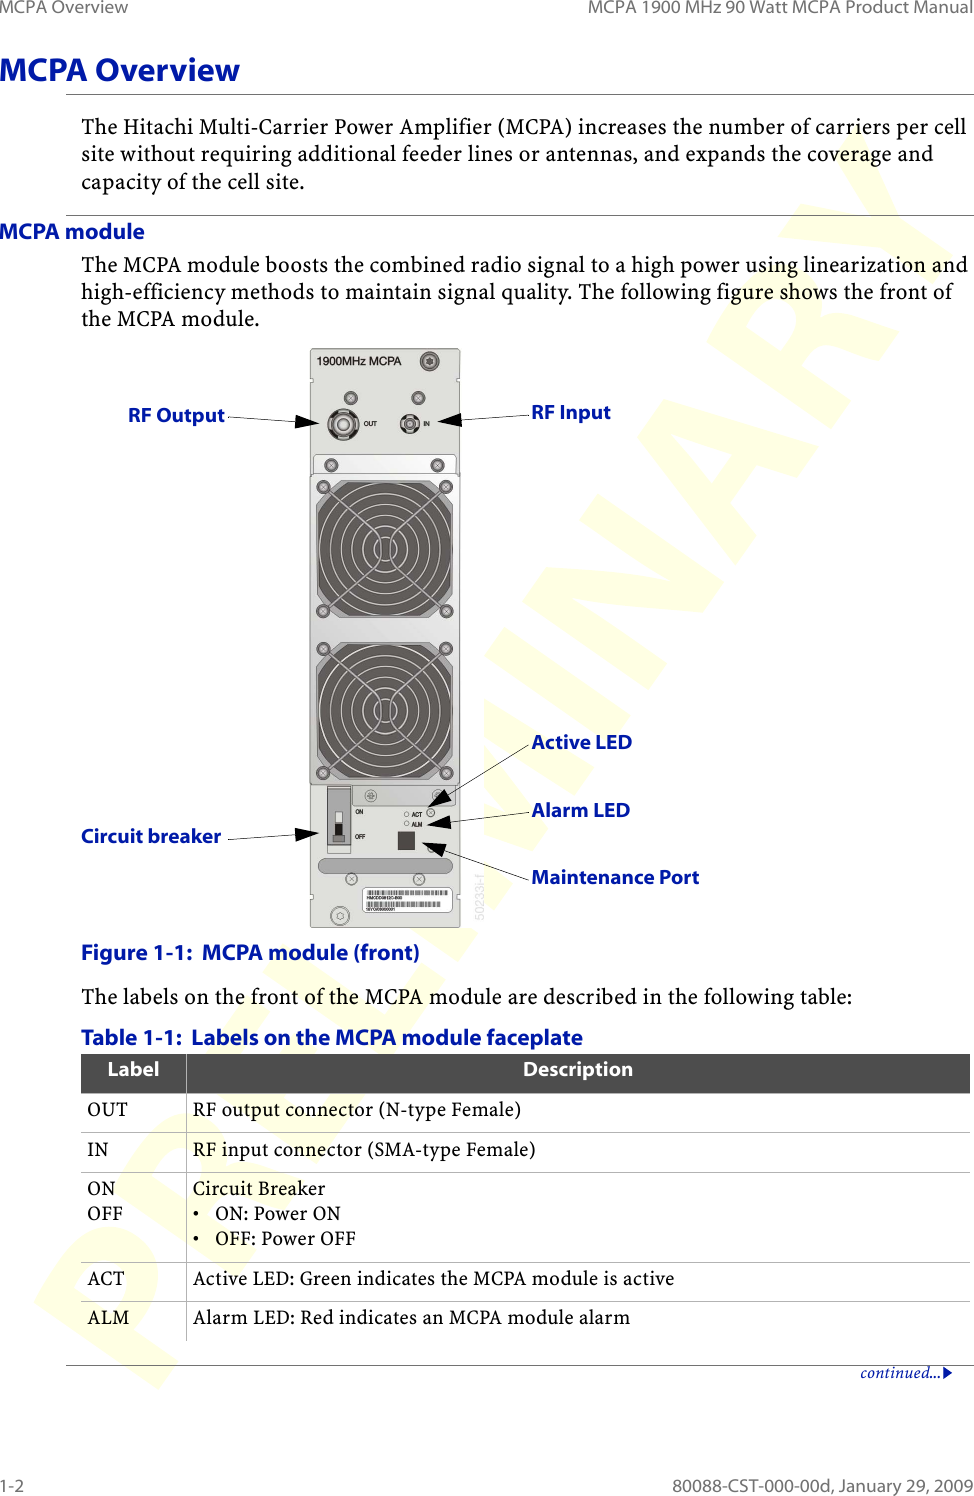 MCPA Overview MCPA 1900 MHz 90 Watt MCPA Product Manual1-2 80088-CST-000-00d, January 29, 2009MCPA OverviewThe Hitachi Multi-Carrier Power Amplifier (MCPA) increases the number of carriers per cell site without requiring additional feeder lines or antennas, and expands the coverage and capacity of the cell site. MCPA moduleThe MCPA module boosts the combined radio signal to a high power using linearization and high-efficiency methods to maintain signal quality. The following figure shows the front of the MCPA module.Figure 1-1:  MCPA module (front)The labels on the front of the MCPA module are described in the following table:continued...Table 1-1:  Labels on the MCPA module faceplateLabel DescriptionOUT RF output connector (N-type Female)IN RF input connector (SMA-type Female)ONOFFCircuit Breaker•ON: Power ON•OFF: Power OFFACT Active LED: Green indicates the MCPA module is activeALM Alarm LED: Red indicates an MCPA module alarmRF Output RF InputCircuit breakerActive LEDAlarm LEDMaintenance Port